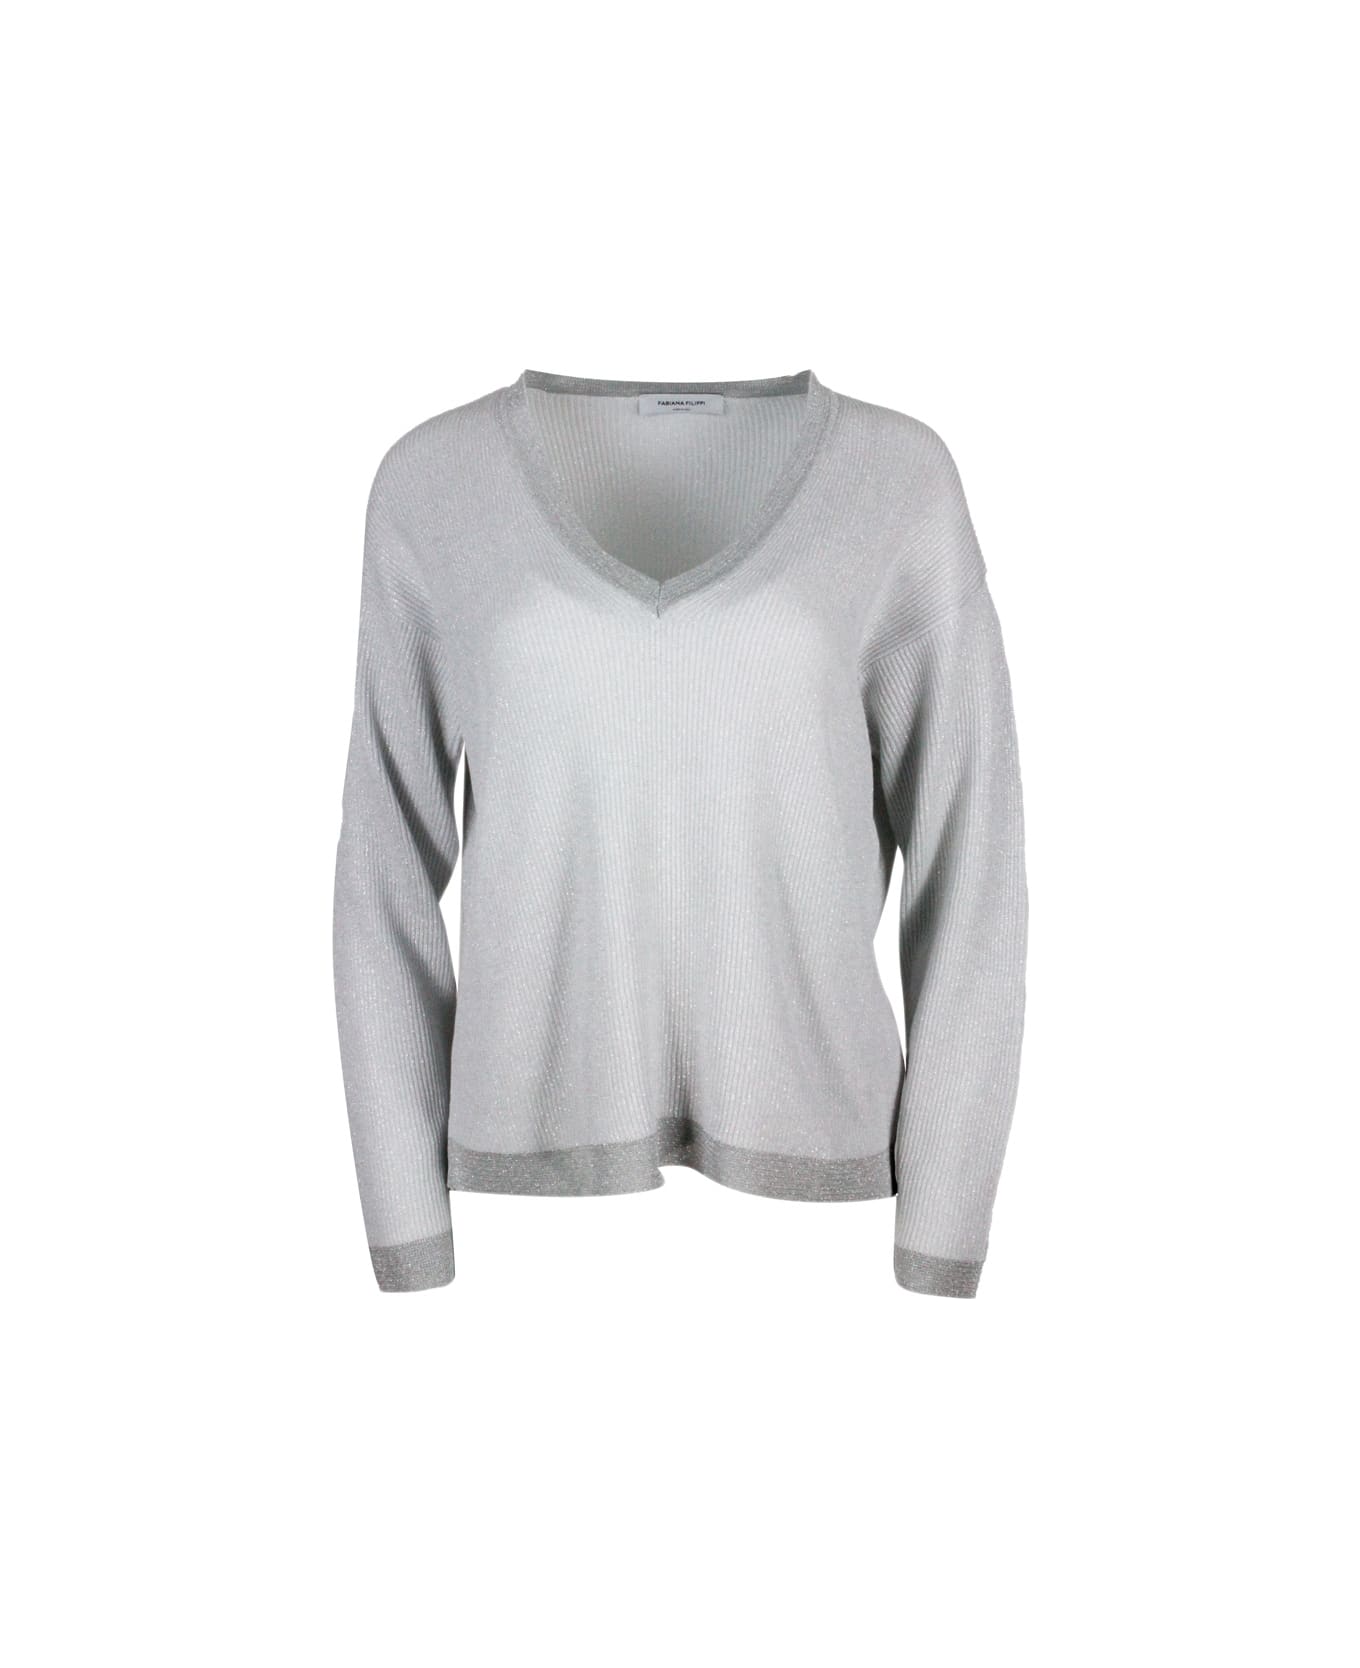 Fabiana Filippi V-neck Cotton Blend Sweater Embellished With Lurex Rows With Contrasting Color Edges - Ice ニットウェア